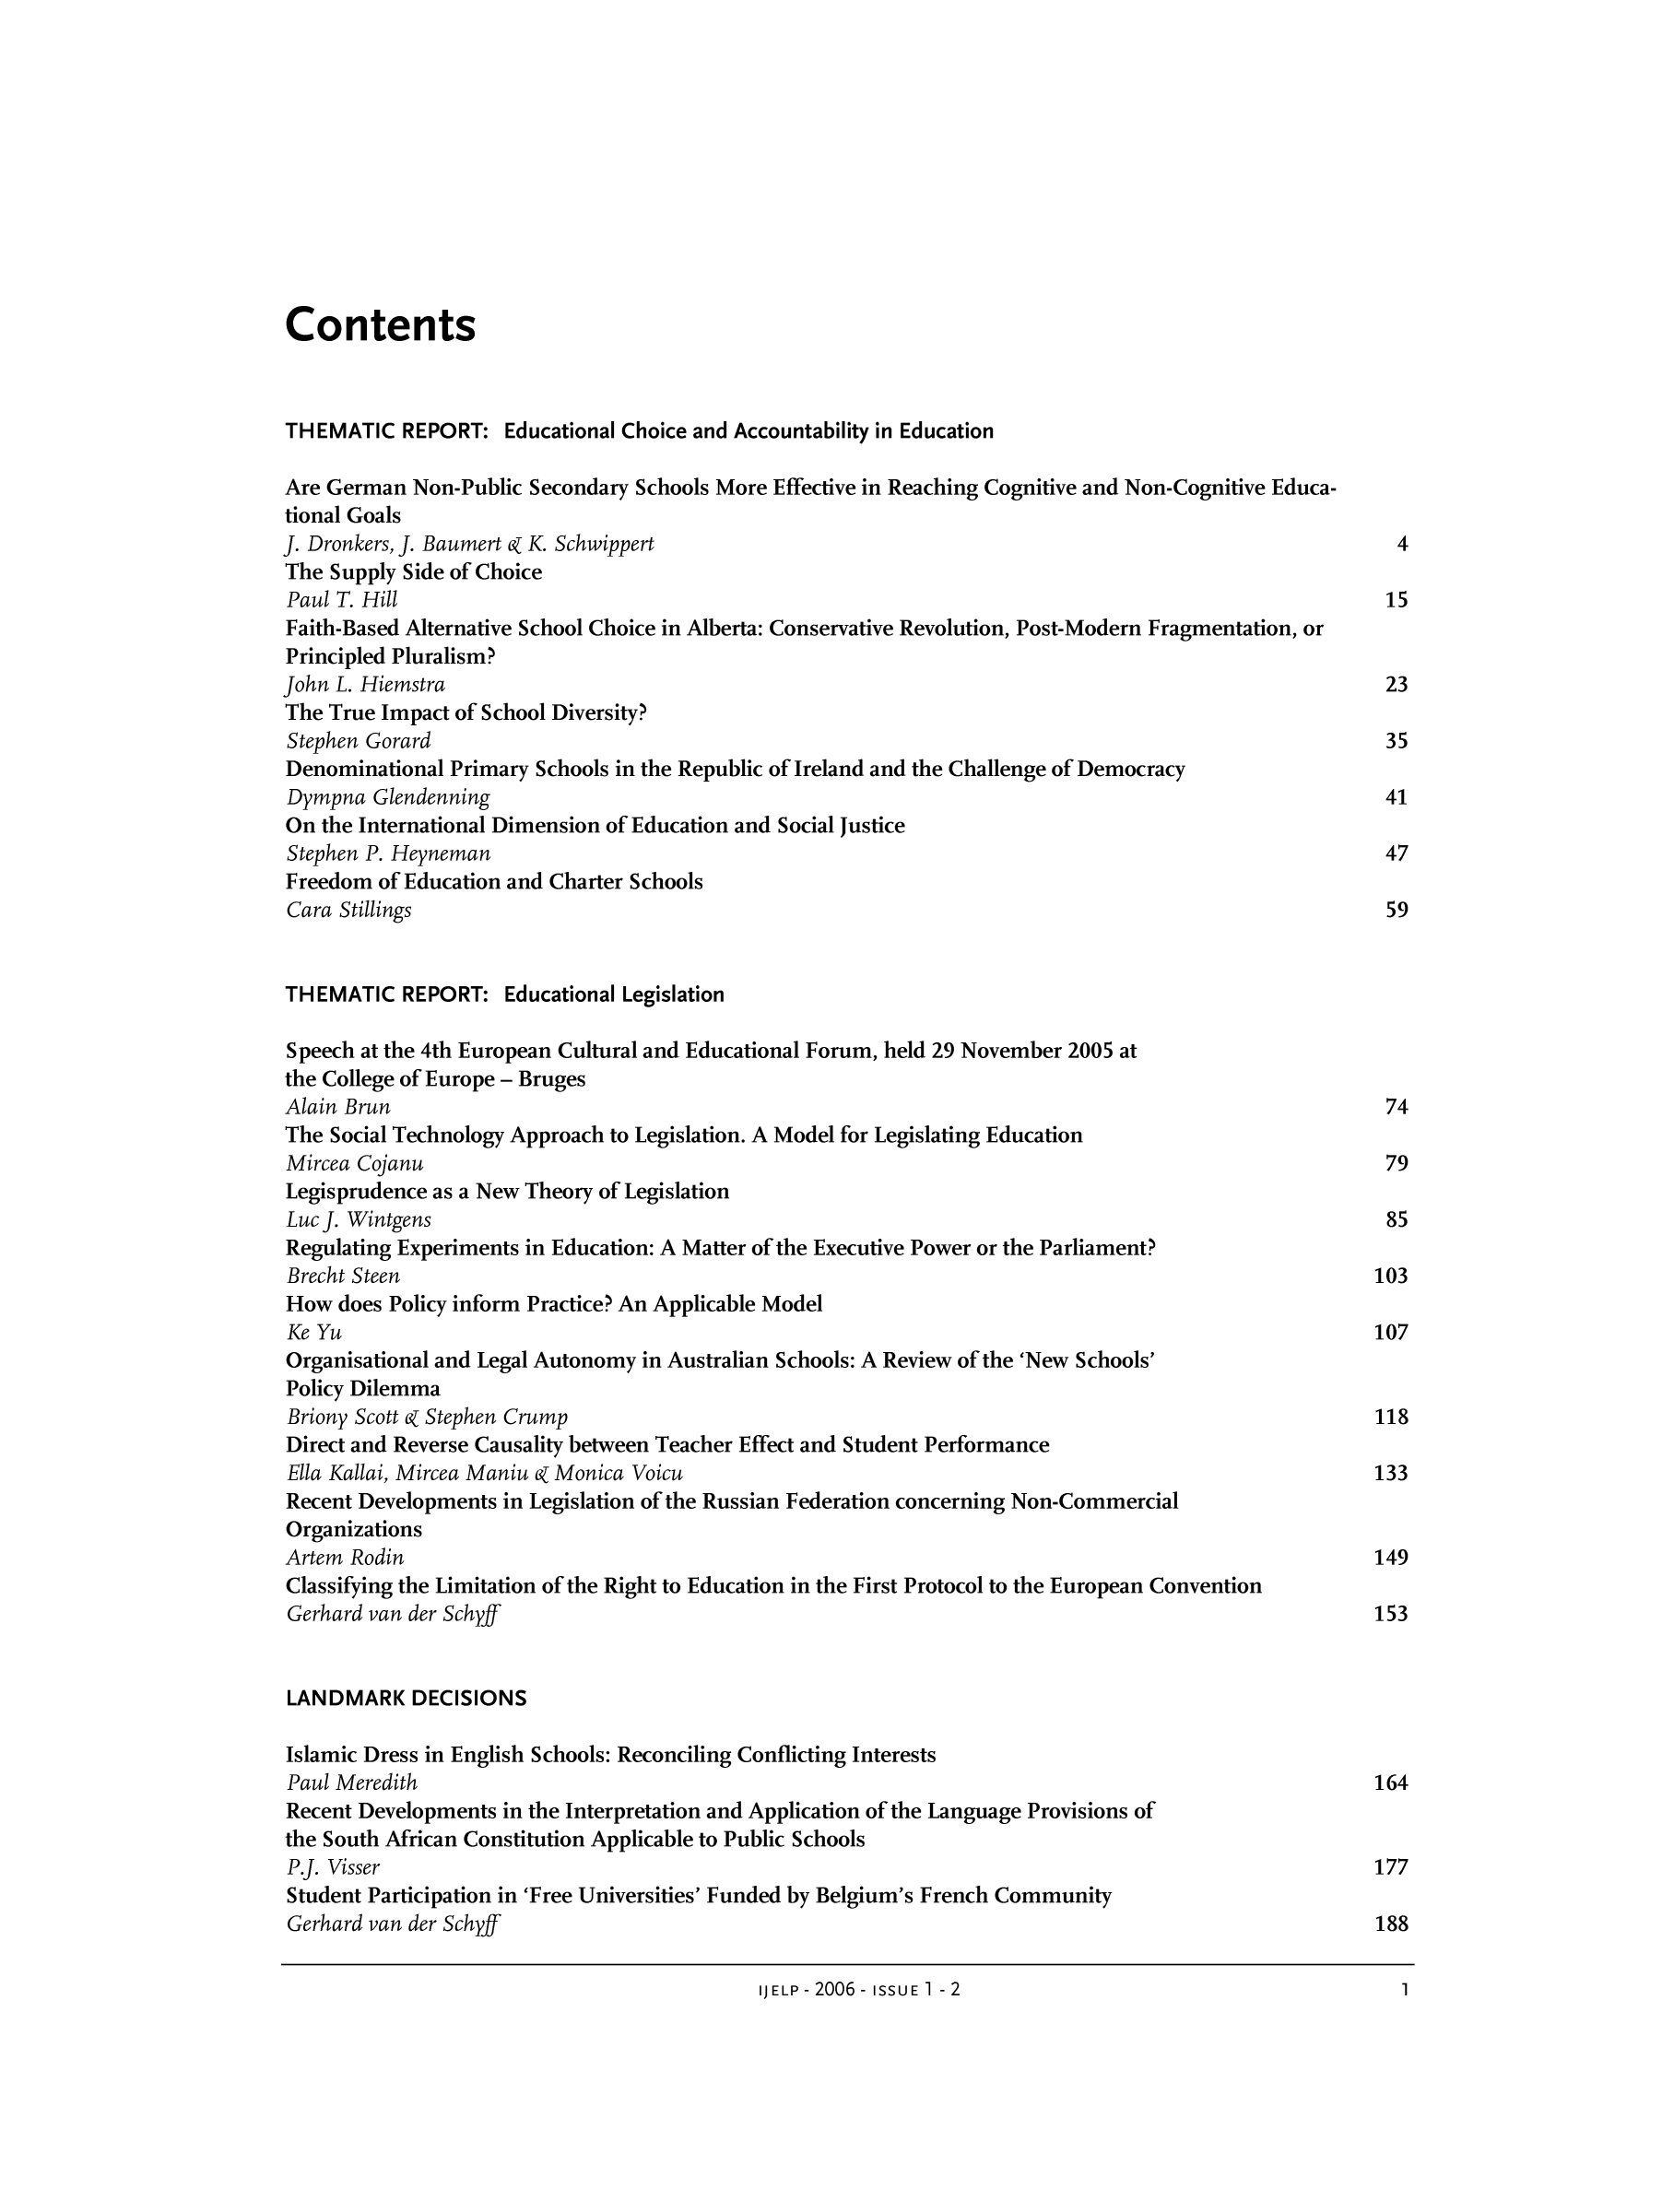 handle is hein.journals/ijelp2 and id is 1 raw text is: ContentsTHEMATIC REPORT: Educational Choice and Accountability in EducationAre German Non-Public Secondary Schools More Effective in Reaching Cognitive and Non-Cognitive Educa-tional GoalsJ. Dronkers, J. Baumert k K. Schwippert                                                          4The Supply Side of ChoicePaul T. Hill                                                                                   15Faith-Based Alternative School Choice in Alberta: Conservative Revolution, Post-Modern Fragmentation, orPrincipled Pluralism?John L. Hiemstra                                                                                23The True Impact of School Diversity?Stephen Gorard                                                                                 35Denominational Primary Schools in the Republic of Ireland and the Challenge of DemocracyDympna Glendenning                                                                             41On the International Dimension of Education and Social JusticeStephen P. Heyneman                                                                            47Freedom of Education and Charter SchoolsCara Stillings                                                                                 59THEMATIC REPORT: Educational LegislationSpeech at the 4th European Cultural and Educational Forum, held 29 November 2005 atthe College of Europe - BrugesAlain Brun                                                                                      74The Social Technology Approach to Legislation. A Model for Legislating EducationMircea Cojanu                                                                                  79Legisprudence as a New Theory of LegislationLucJ. Wintgens                                                                                 85Regulating Experiments in Education: A Matter of the Executive Power or the Parliament?Brecht Steen                                                                                  103How does Policy inform Practice? An Applicable ModelKe Yu                                                                                         107Organisational and Legal Autonomy in Australian Schools: A Review of the 'New Schools'Policy DilemmaBriony Scott k Stephen Crump                                                                  118Direct and Reverse Causality between Teacher Effect and Student PerformanceElla Kallai, Mircea Maniu k Monica Voicu                                                      133Recent Developments in Legislation of the Russian Federation concerning Non-CommercialOrganizationsArtem Rodin                                                                                    149Classifying the Limitation of the Right to Education in the First Protocol to the European ConventionGerhard van der Schyff                                                                        153LANDMARK DECISIONSIslamic Dress in English Schools: Reconciling Conflicting InterestsPaul Meredith                                                                                 164Recent Developments in the Interpretation and Application of the Language Provisions ofthe South African Constitution Applicable to Public SchoolsP.J. Visser                                                                                   177Student Participation in 'Free Universities' Funded by Belgium's French CommunityGerhard van der Sch}'ff                                                                       188IJELP- 2006 -ISSUE 1 - 2                                1